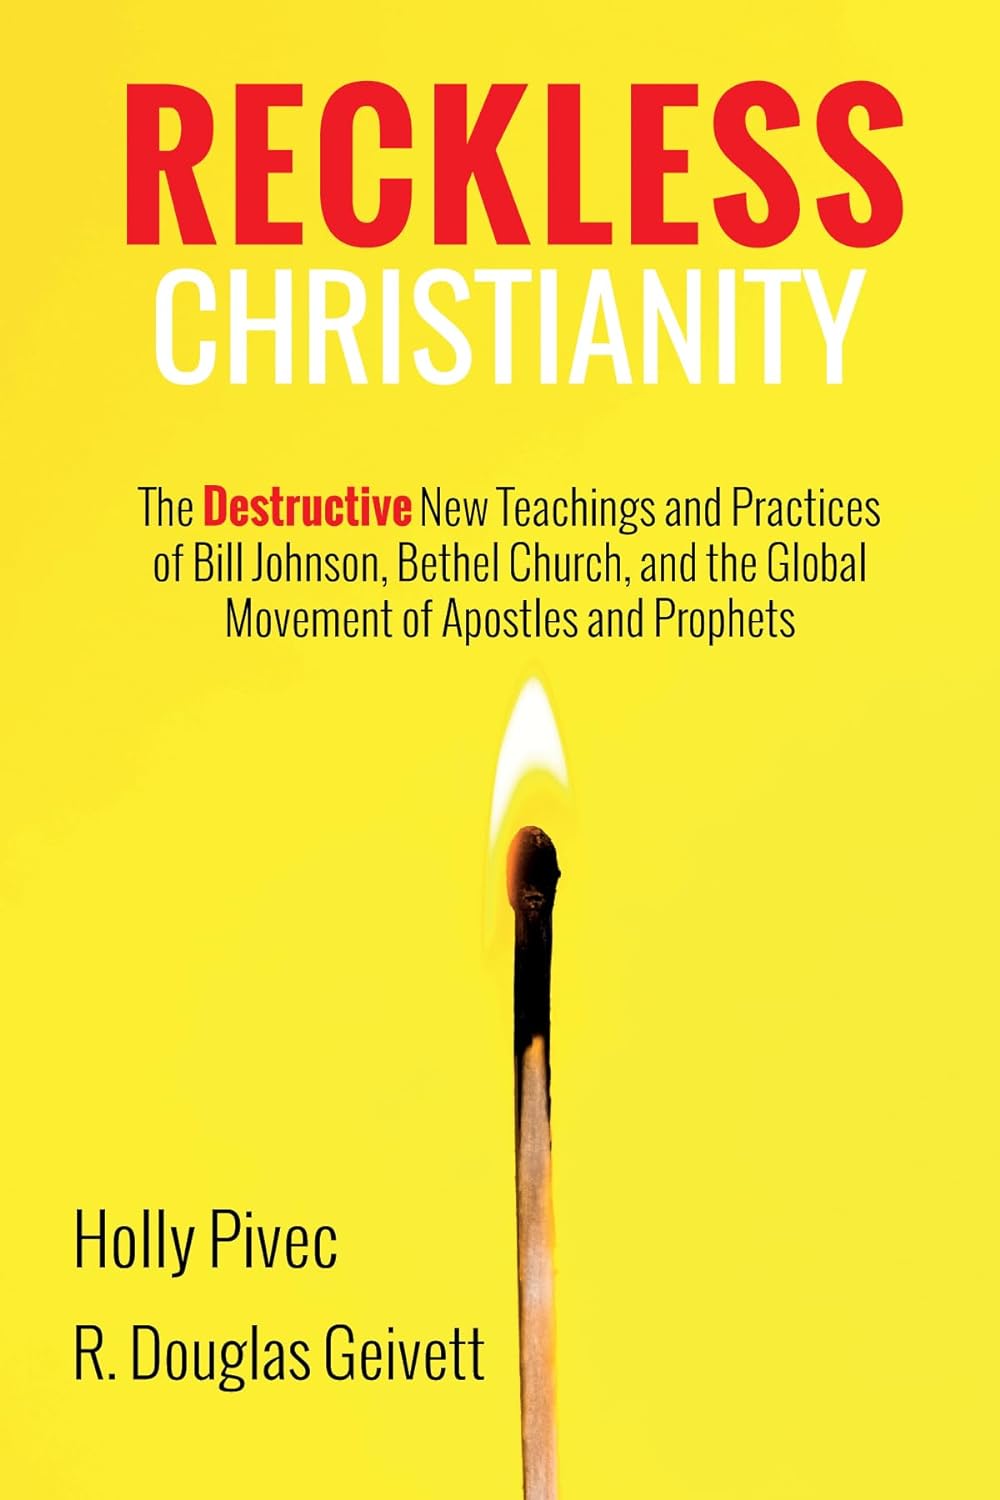 Reckless Christianity: The Destructive New Teachings and Practices of Bill Johnson, Bethel Church, and the Global Movement of Apostles and Prophets